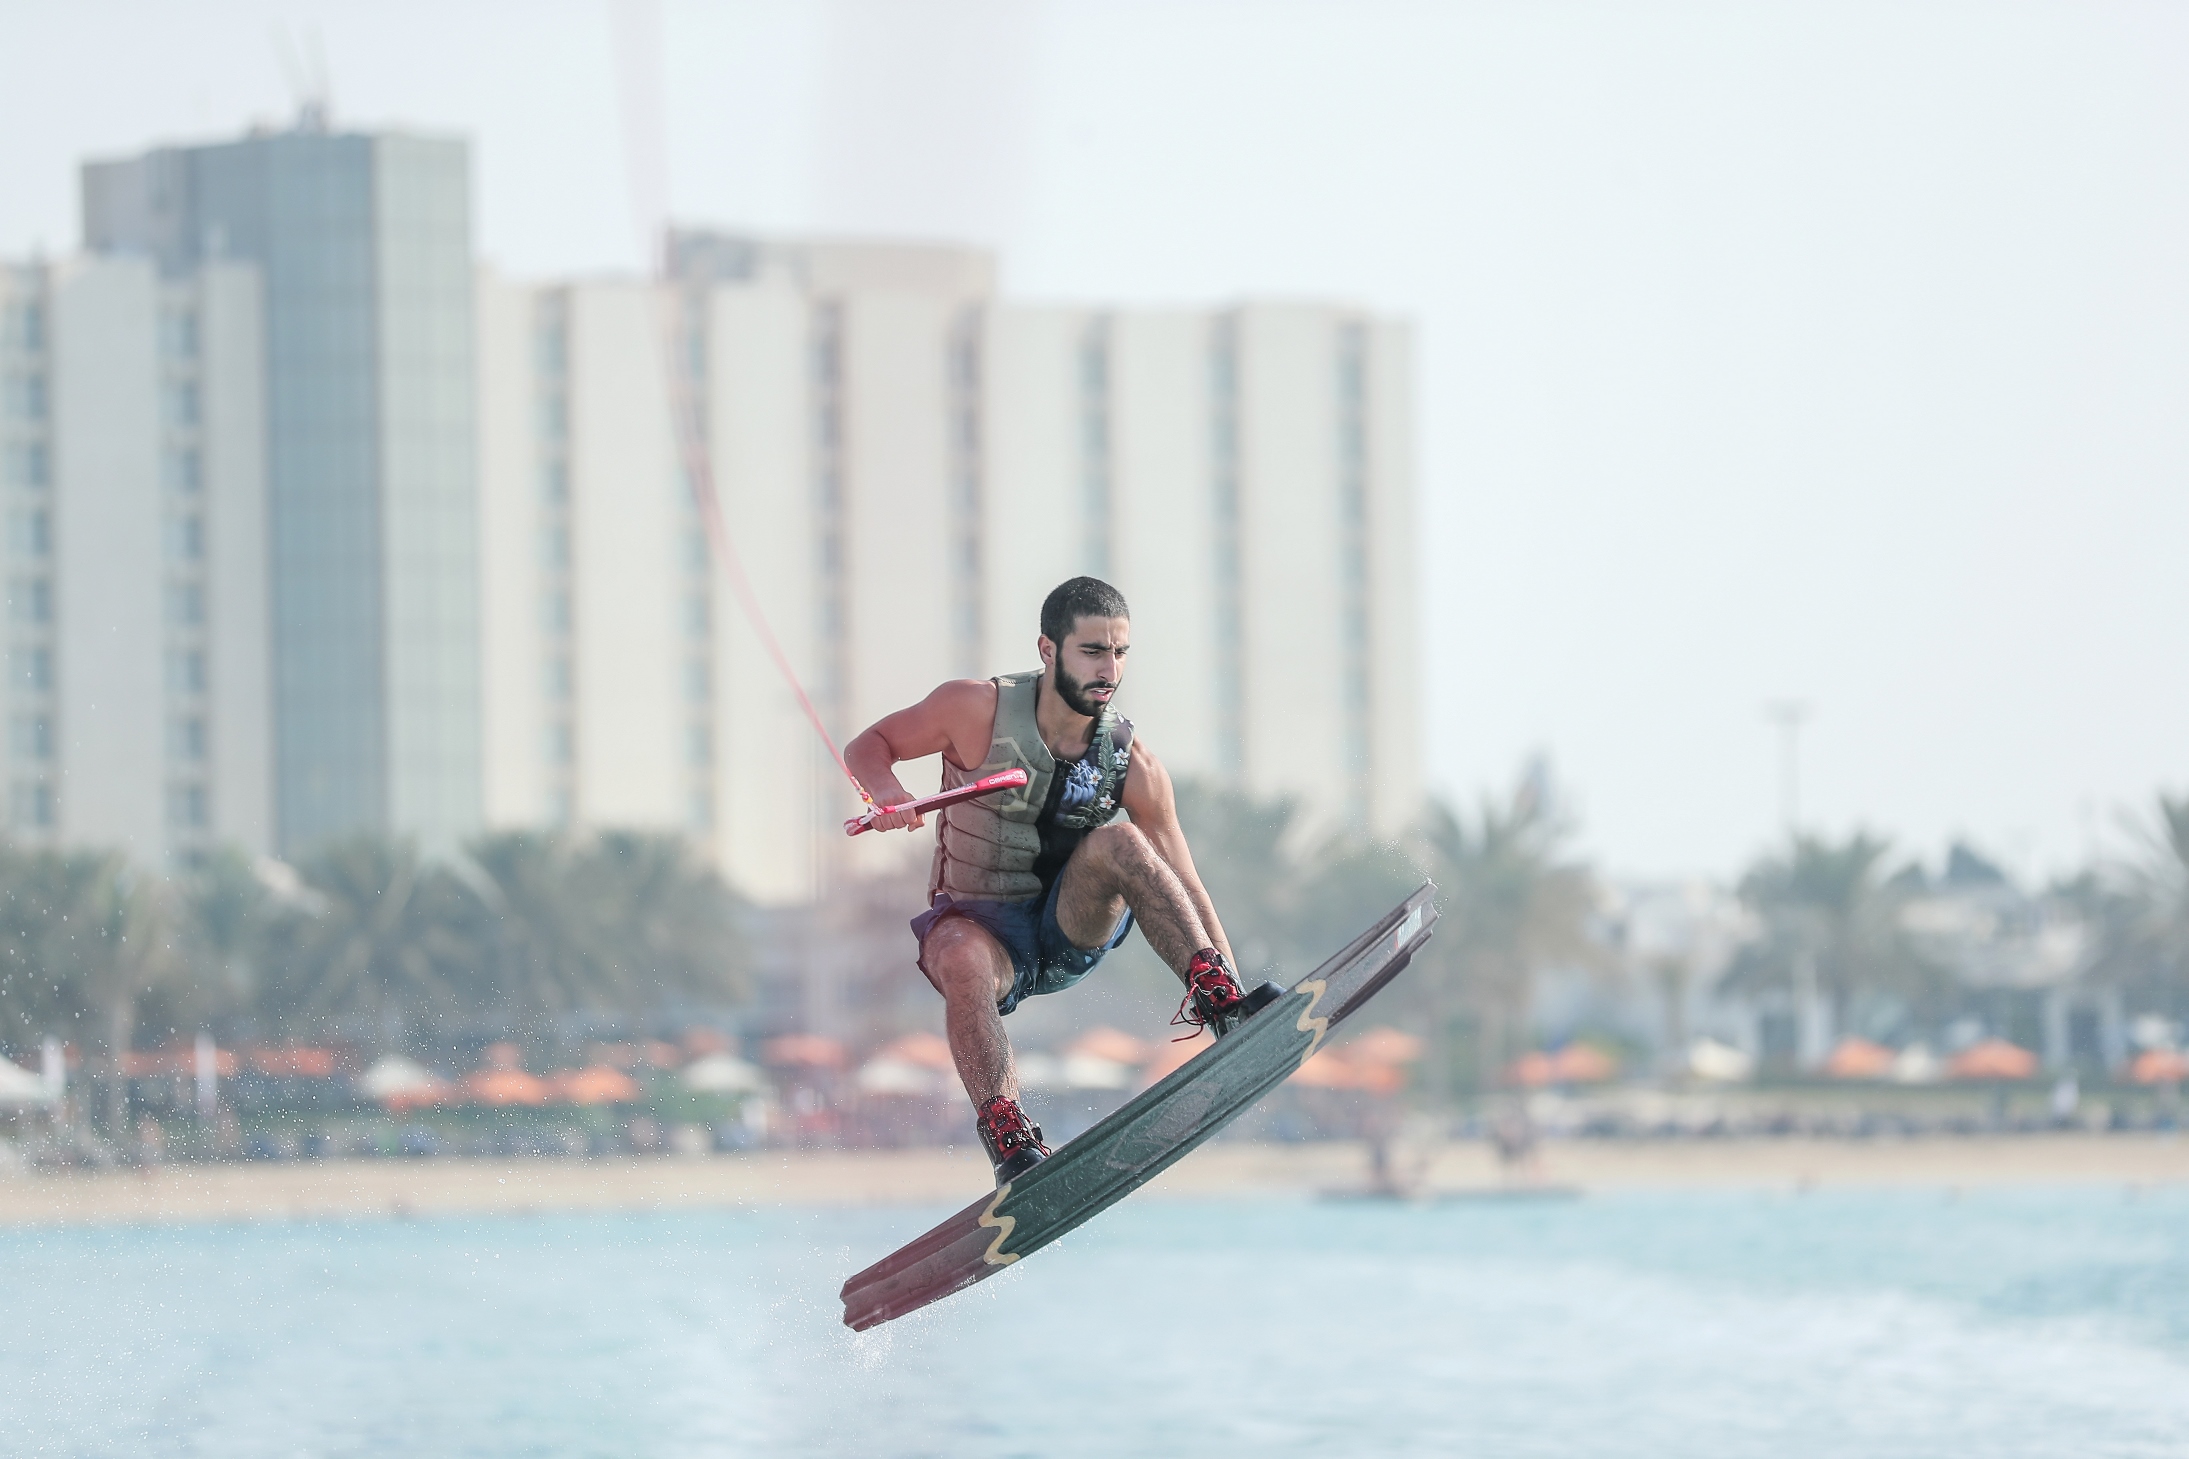 OMEIR AIMS FOR BACK TO BACK WAKEBOARD WINS